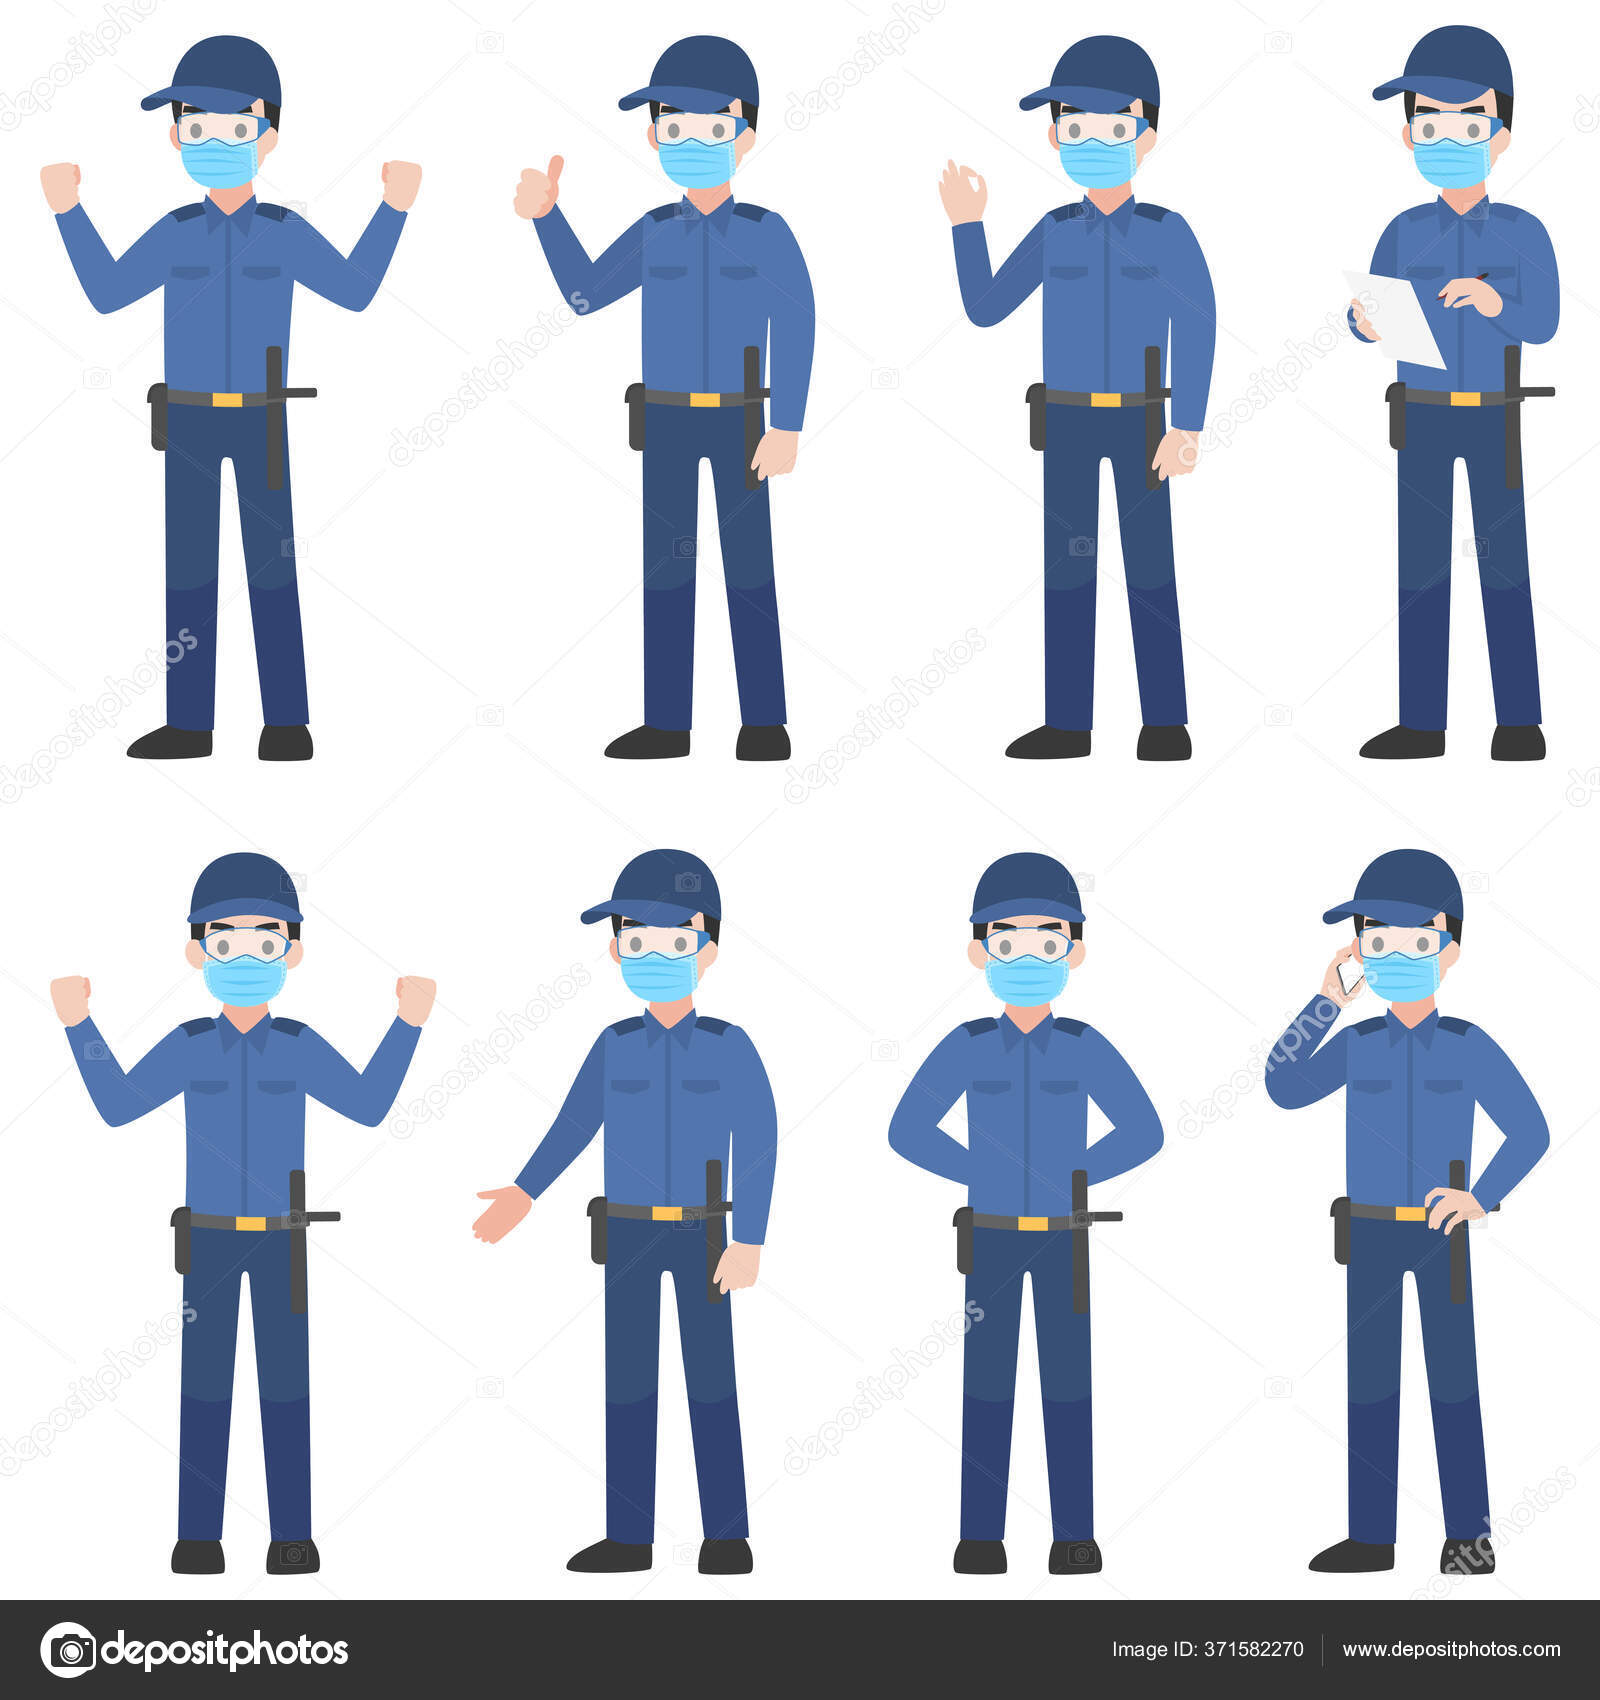 Free: Character poses illustration Free Vector - nohat.cc